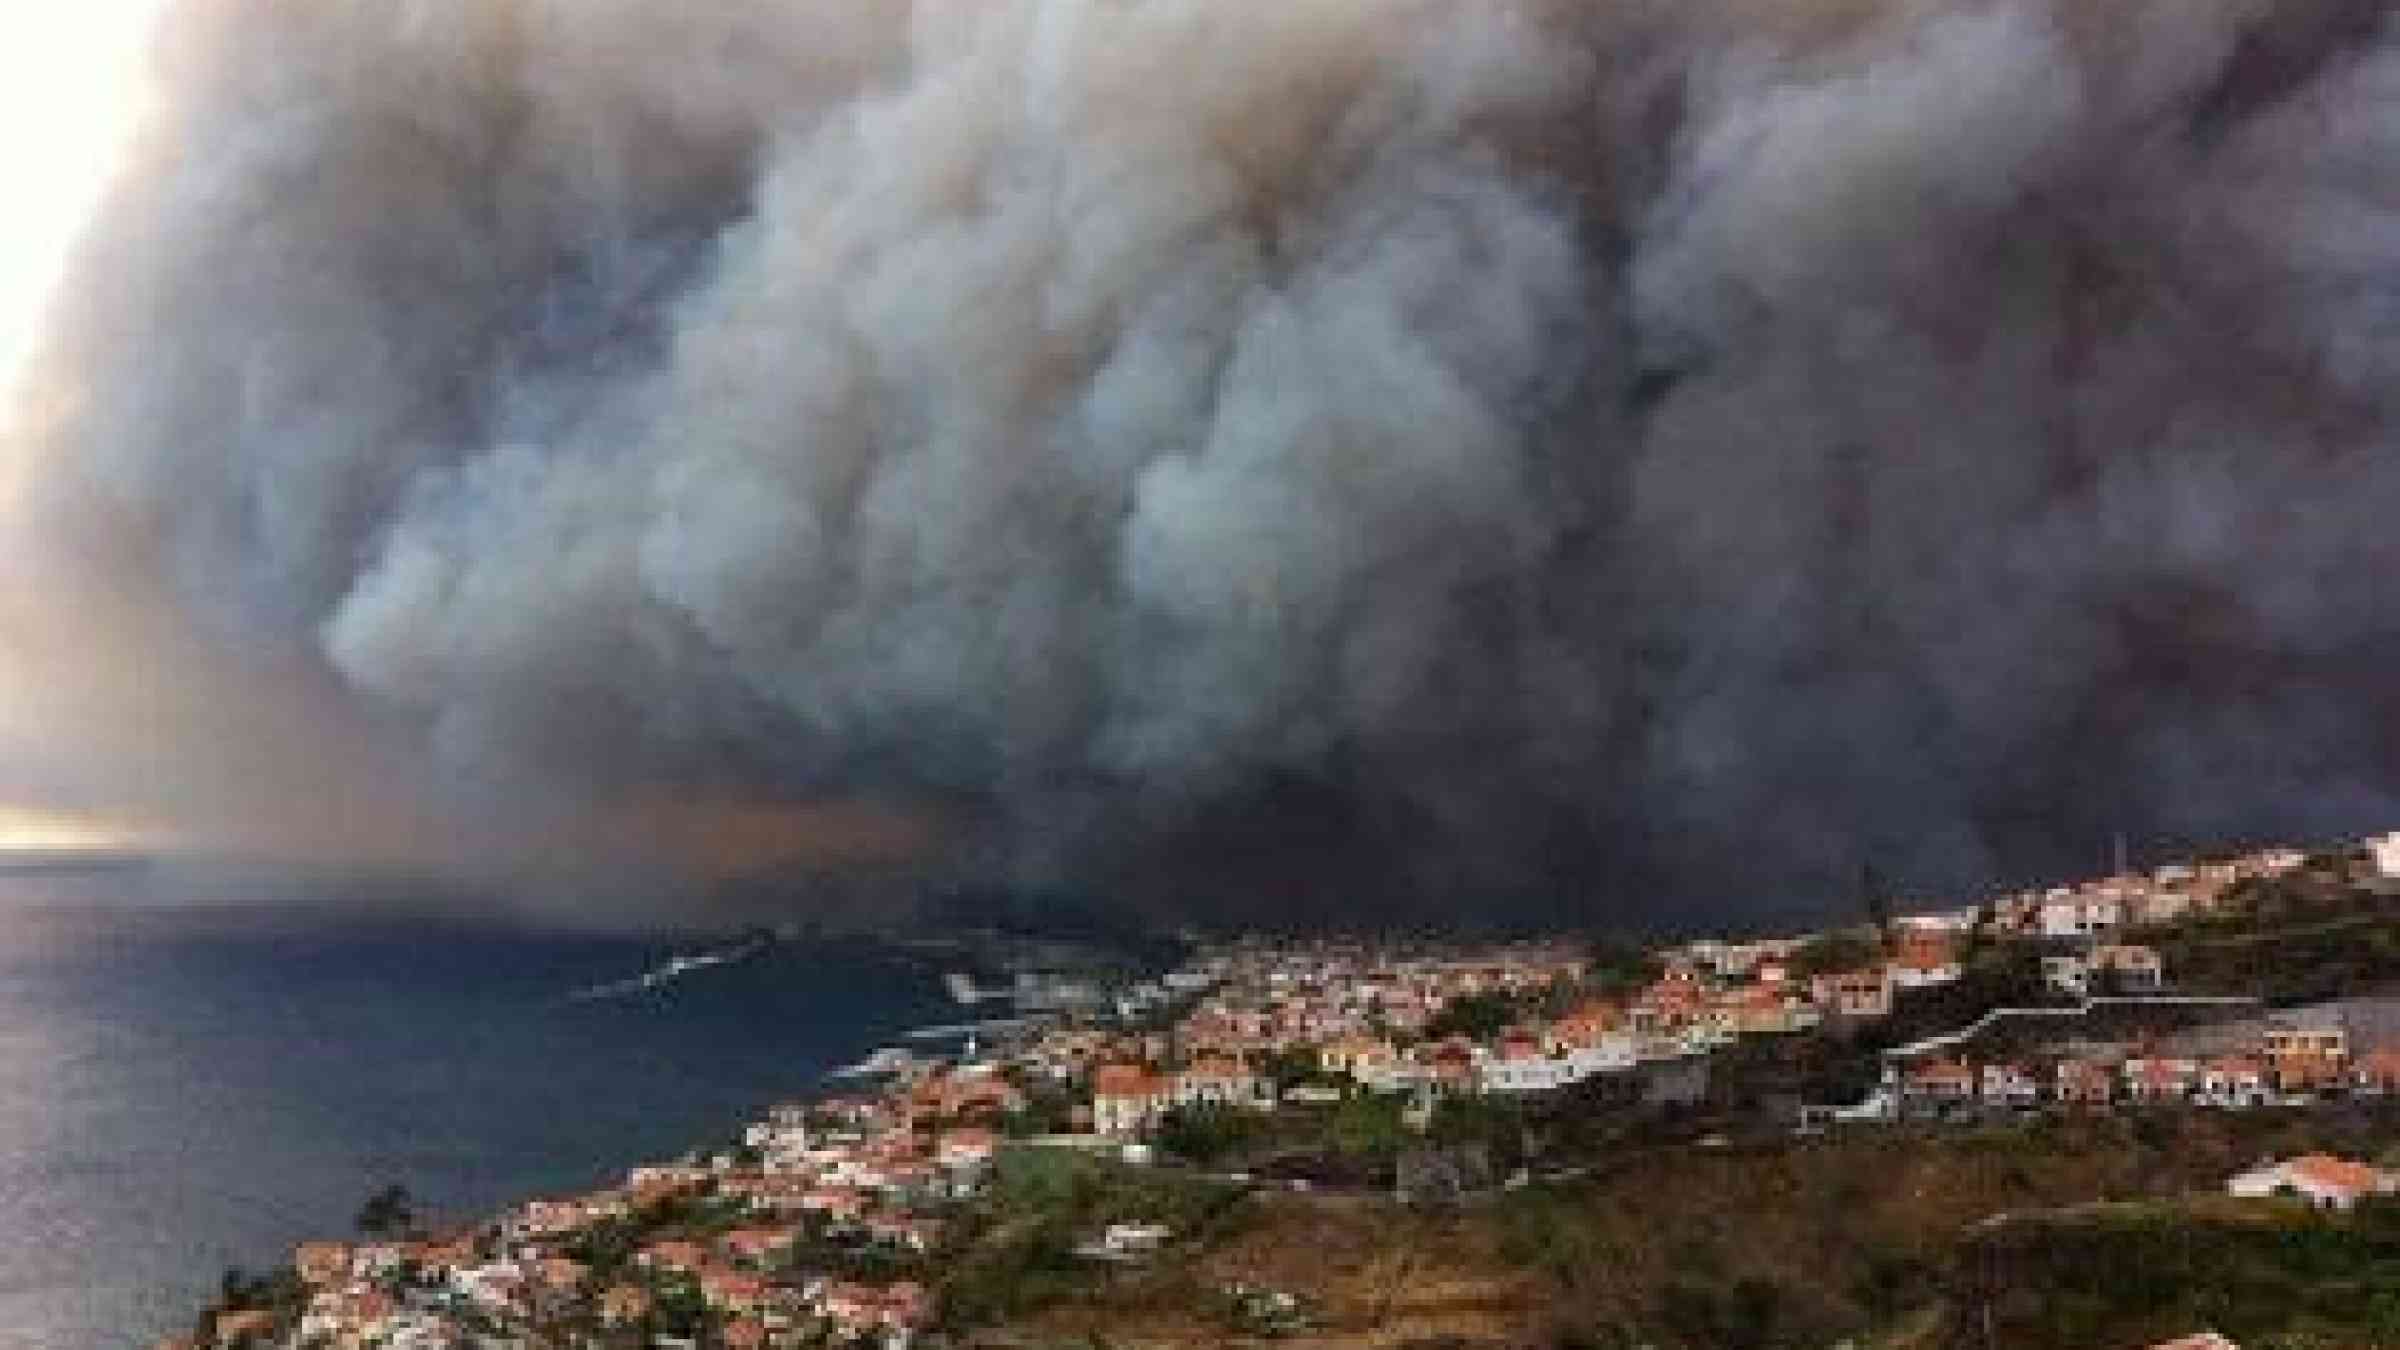 Forest fires are a major concern for European scientists working on disaster risk.